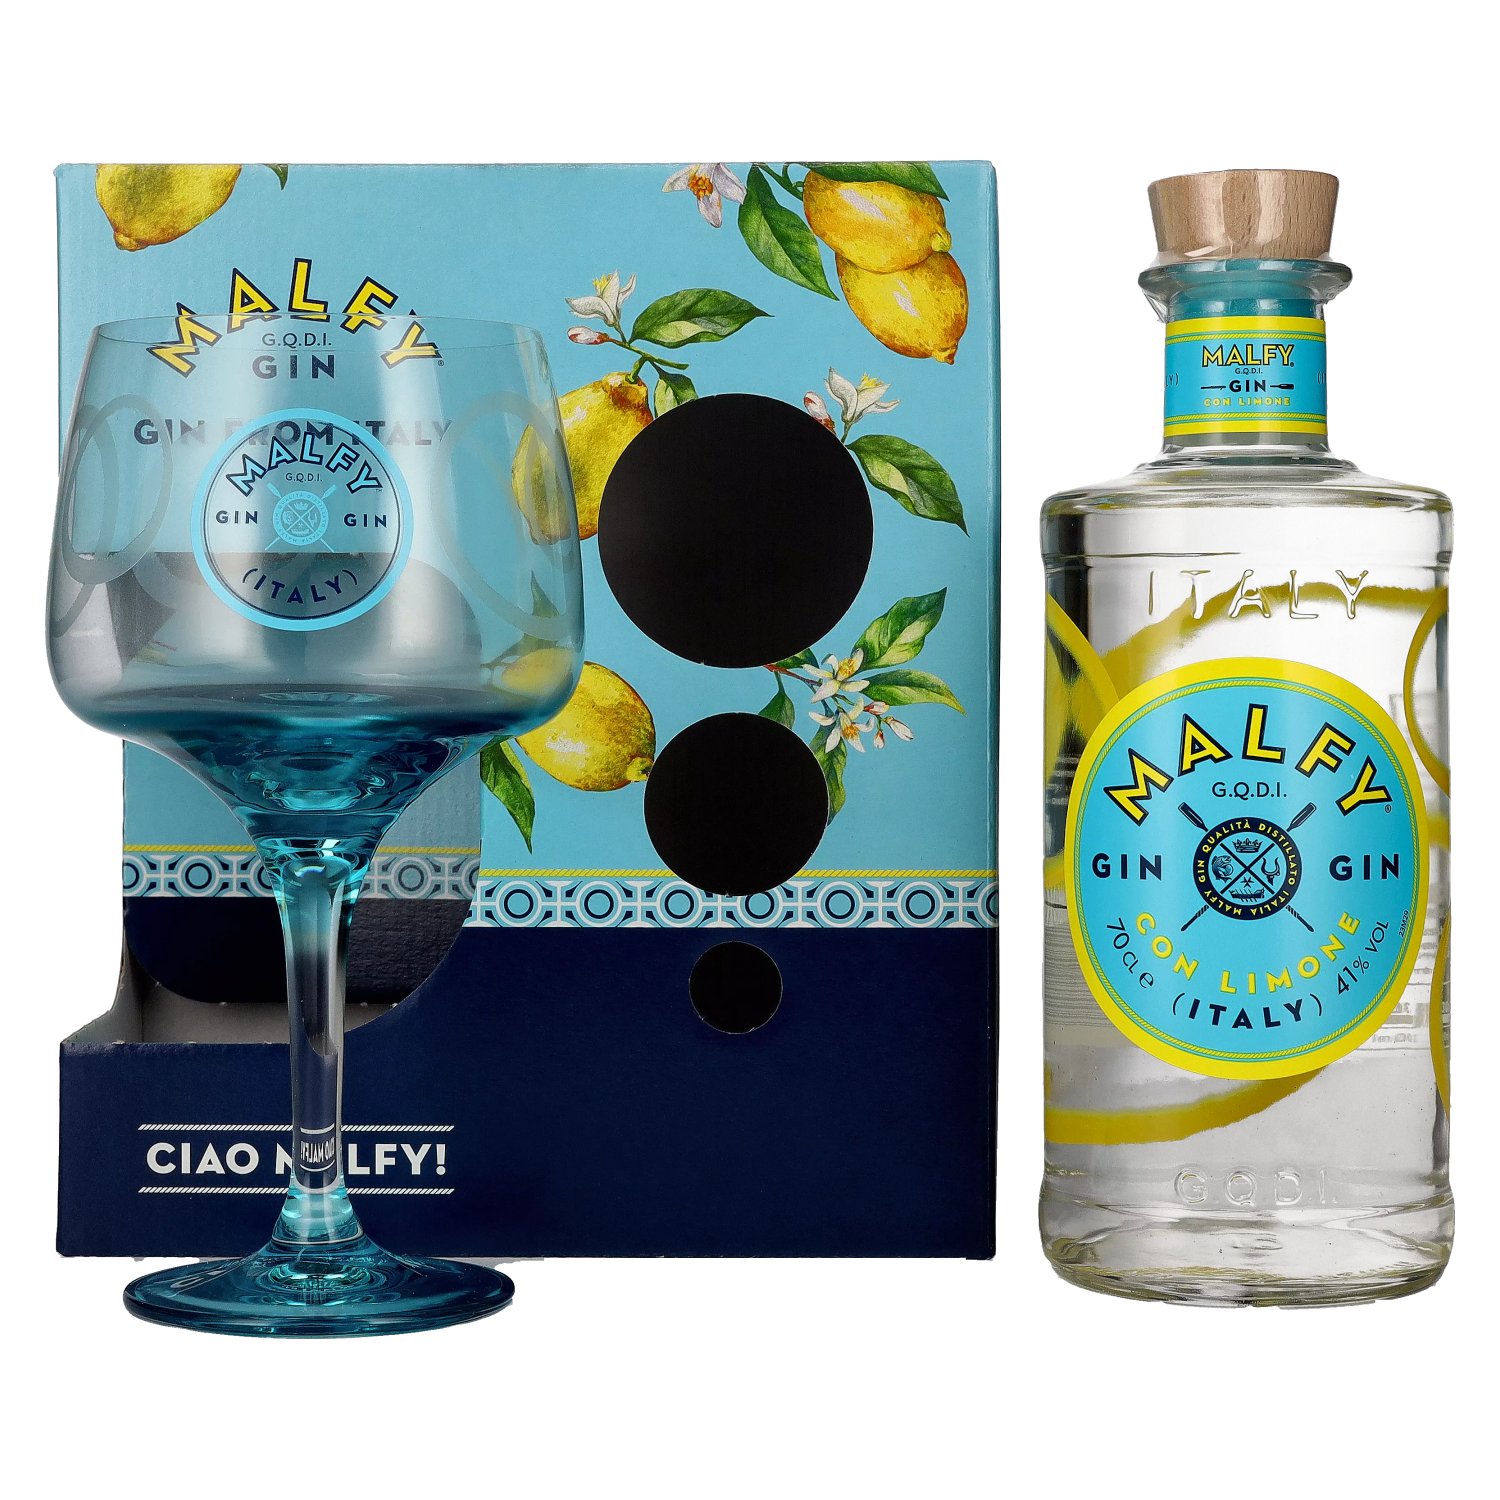 Malfy Gin CON LIMONE 41% Vol. 0,7l in Giftbox with glass | Gin